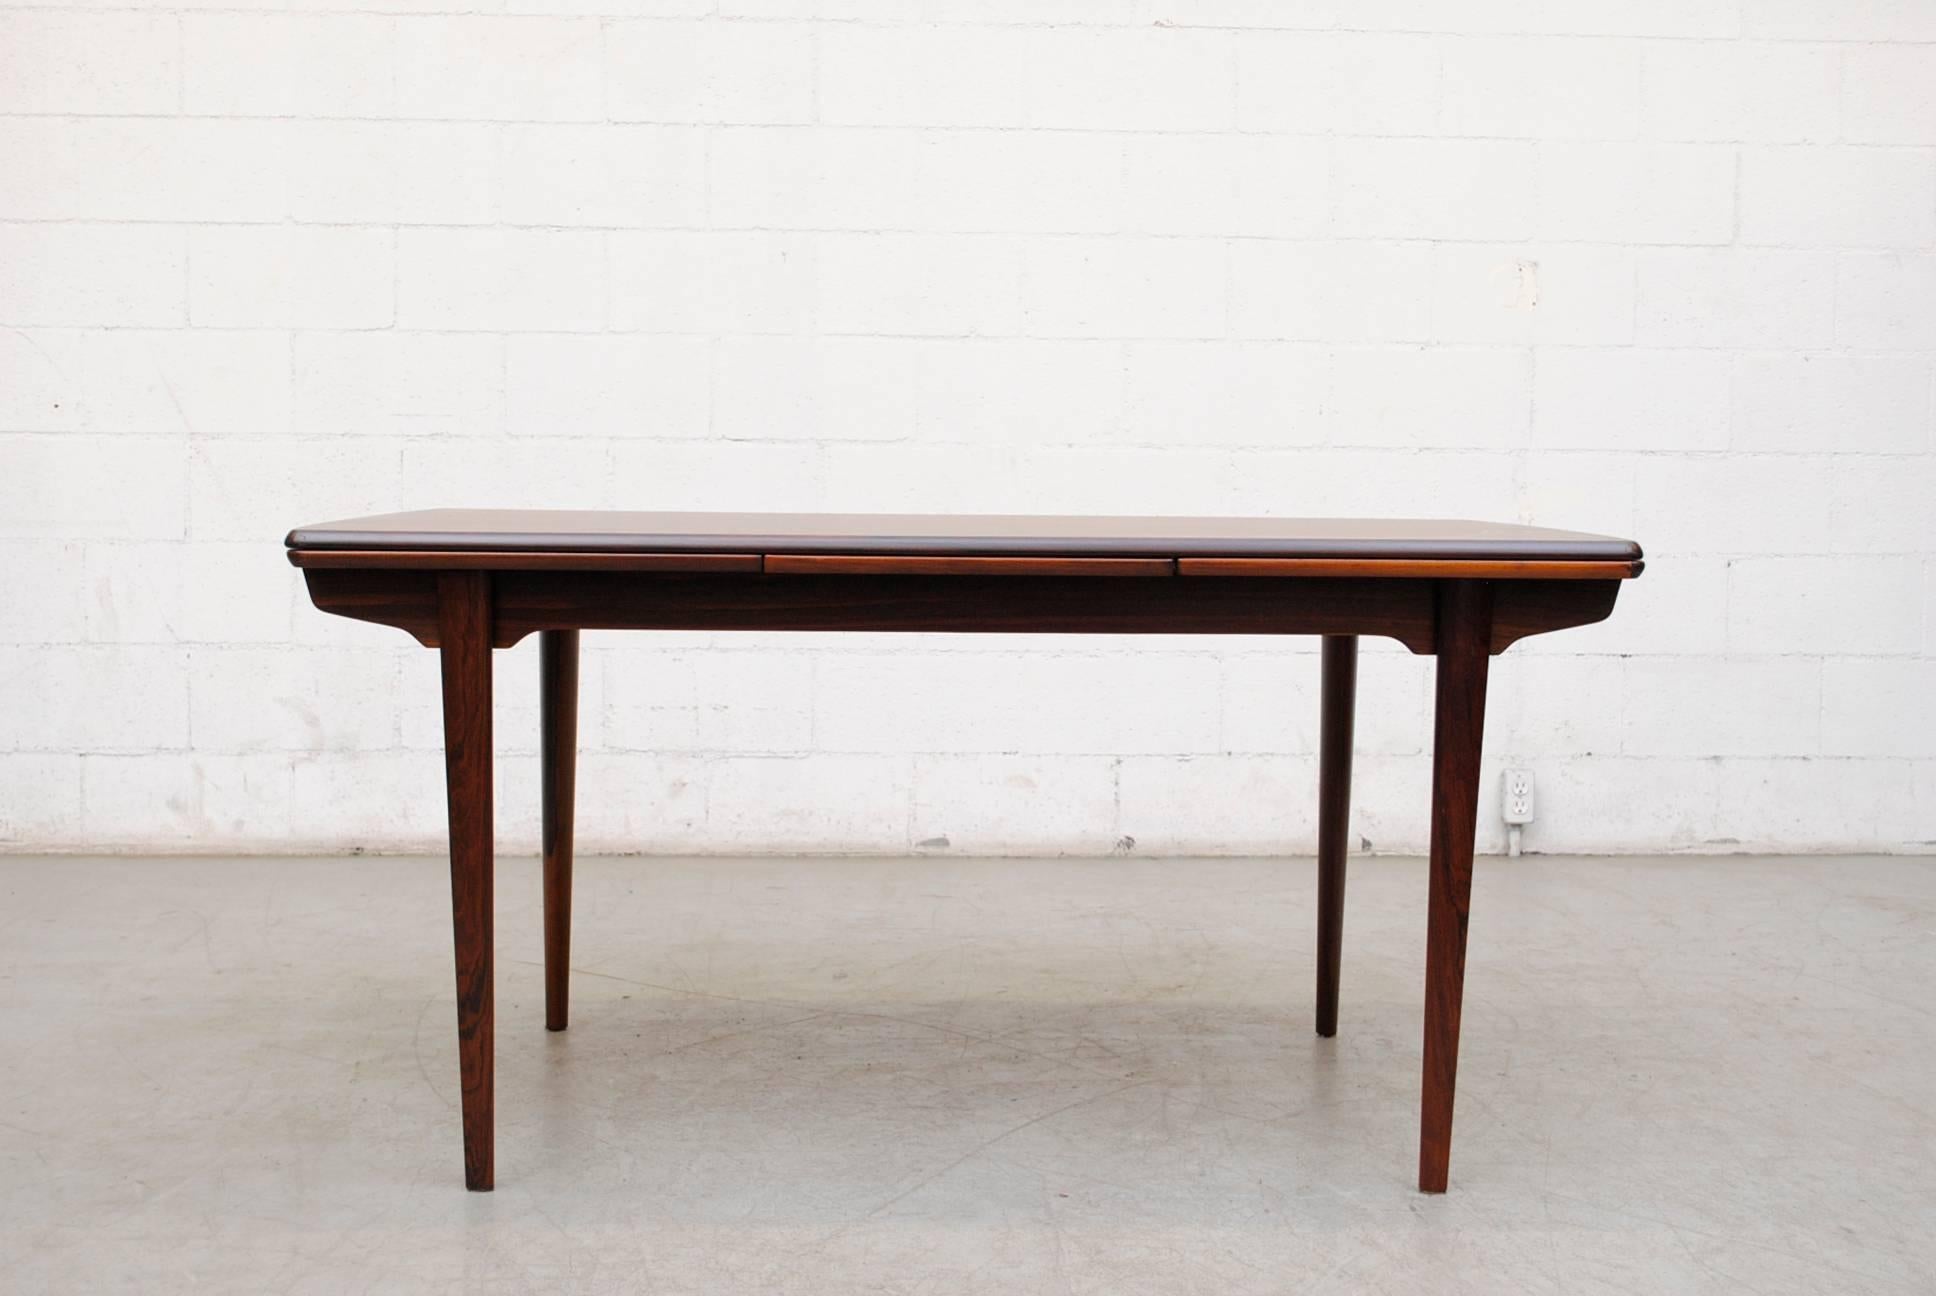 Gorgeous Danish Rosewood Dining Table by H.P. Hansen with Pull-out Leaf Extensions. Beautiful Grain Pattern on Top. Handsome frame. Inspired by Greta Grossman. Also available are 6 matching dining chairs with grey velvet, listed separately (S343 RW